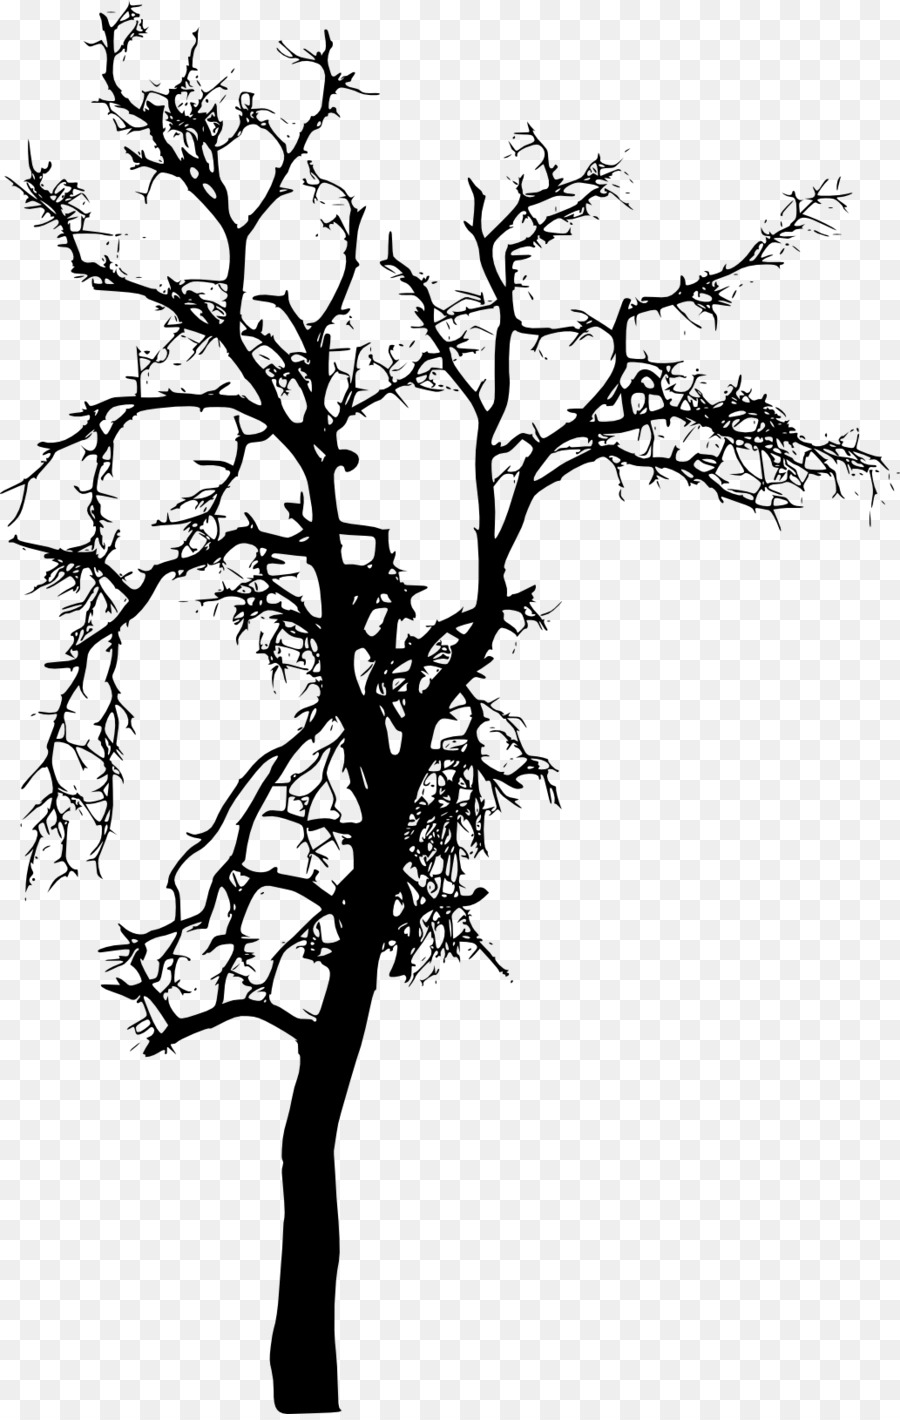 Tree Plant Branch Silhouette - tree silhouette png download - 1033*1623 - Free Transparent Tree png Download.